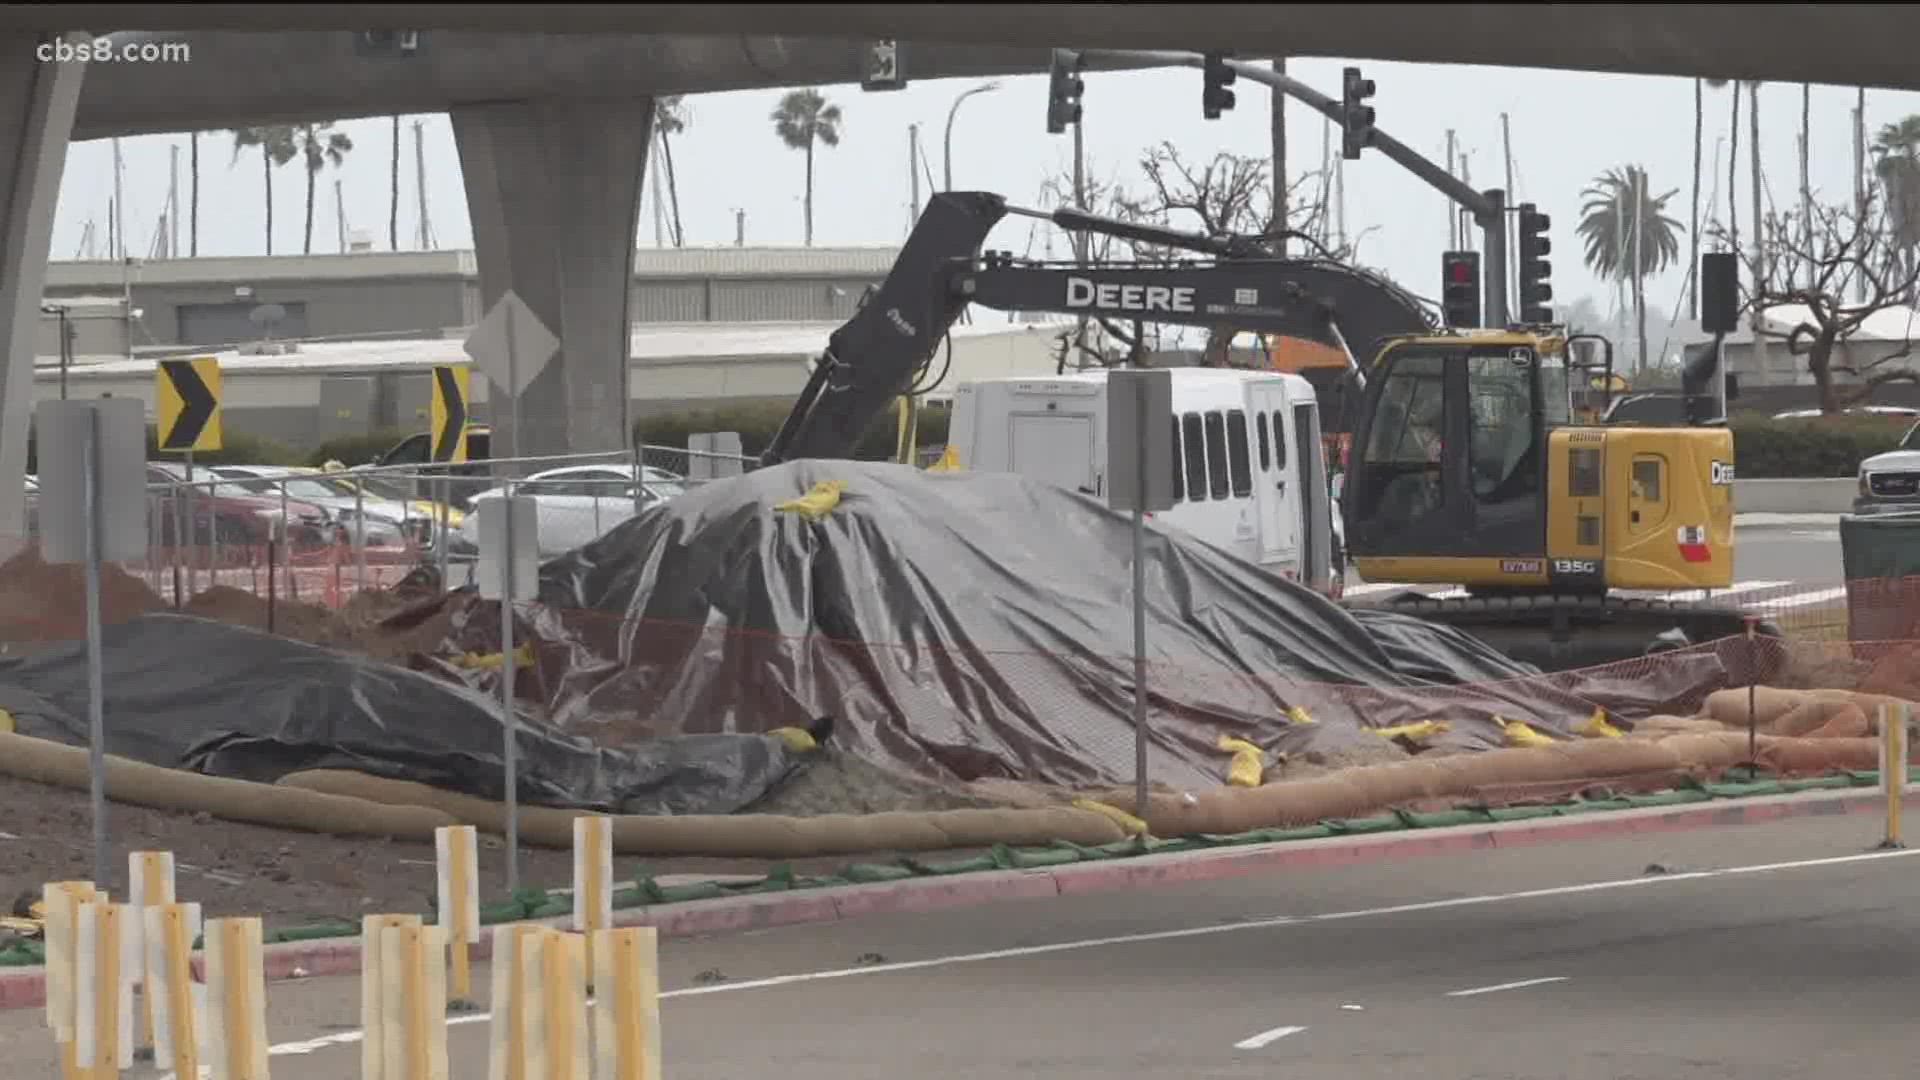 Reduced parking and construction zones are causing headaches for travelers. We talked to airport officials so you can travel without the stress.